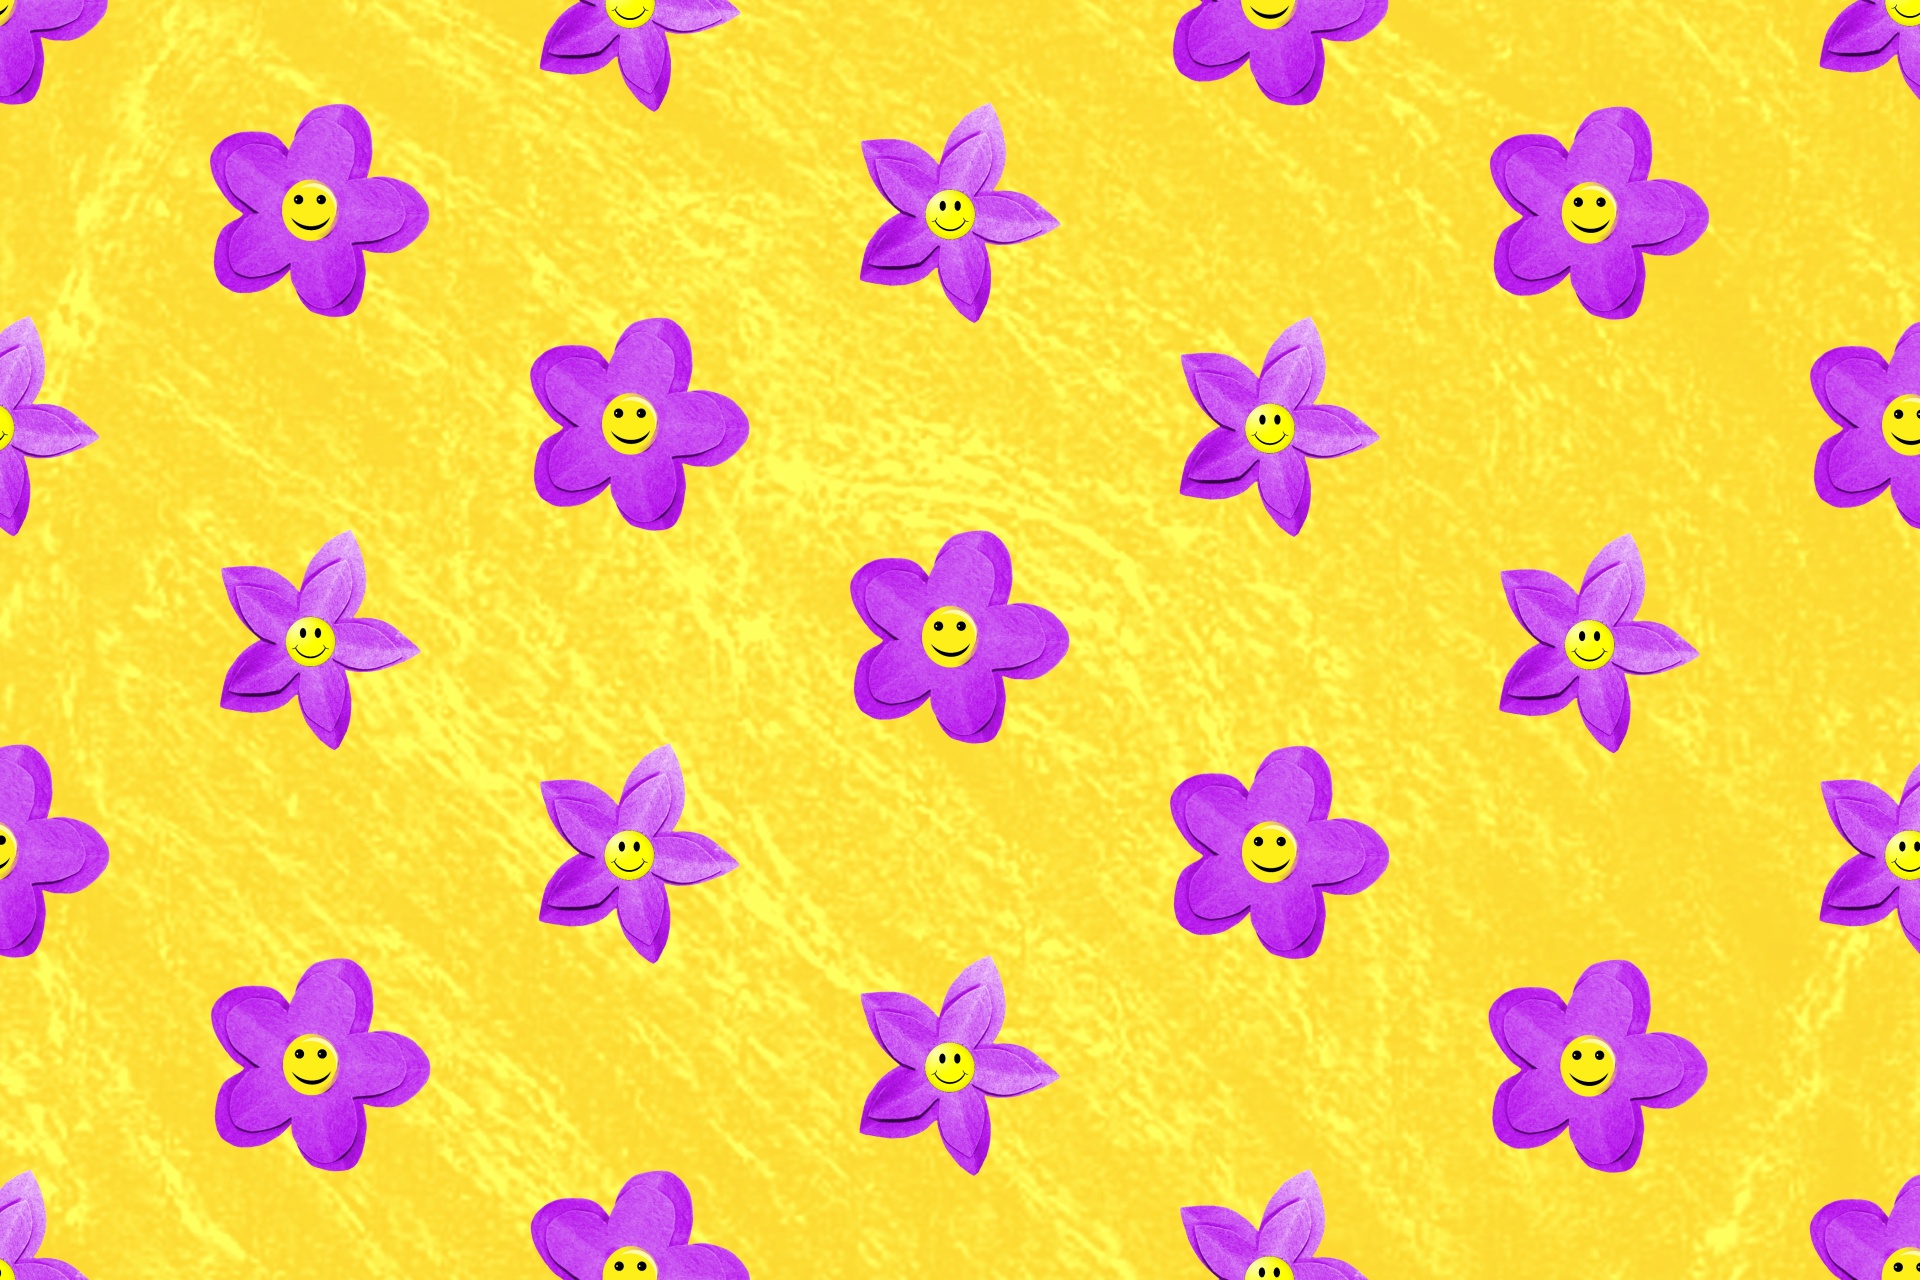 Emoticon Flowers Nature Free Photo - Flower Power Background - HD Wallpaper 